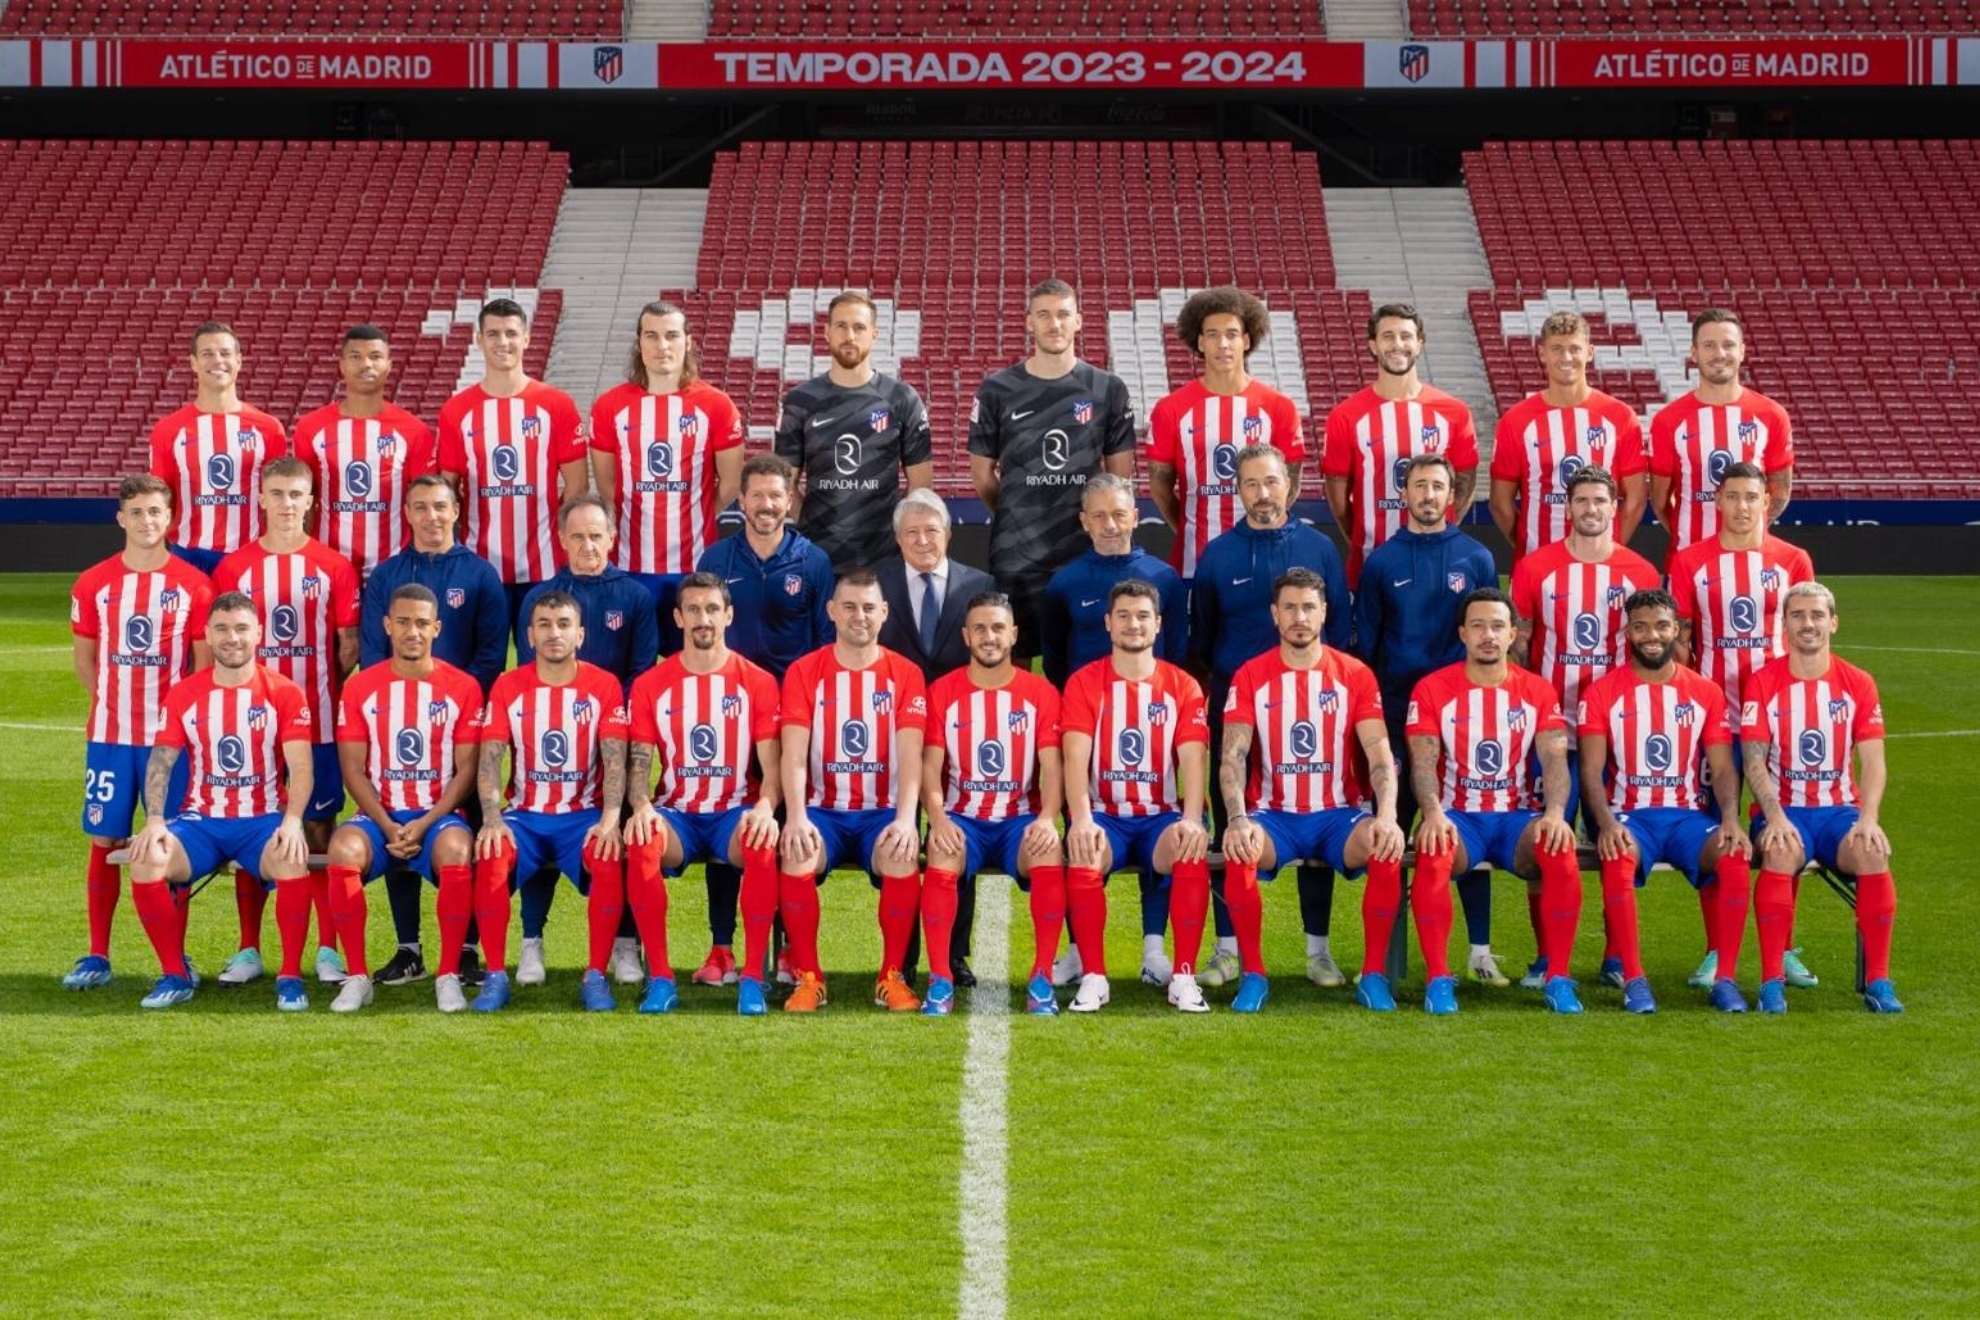 Two Atletico Madrid Fan Token holders sneak into the official team picture